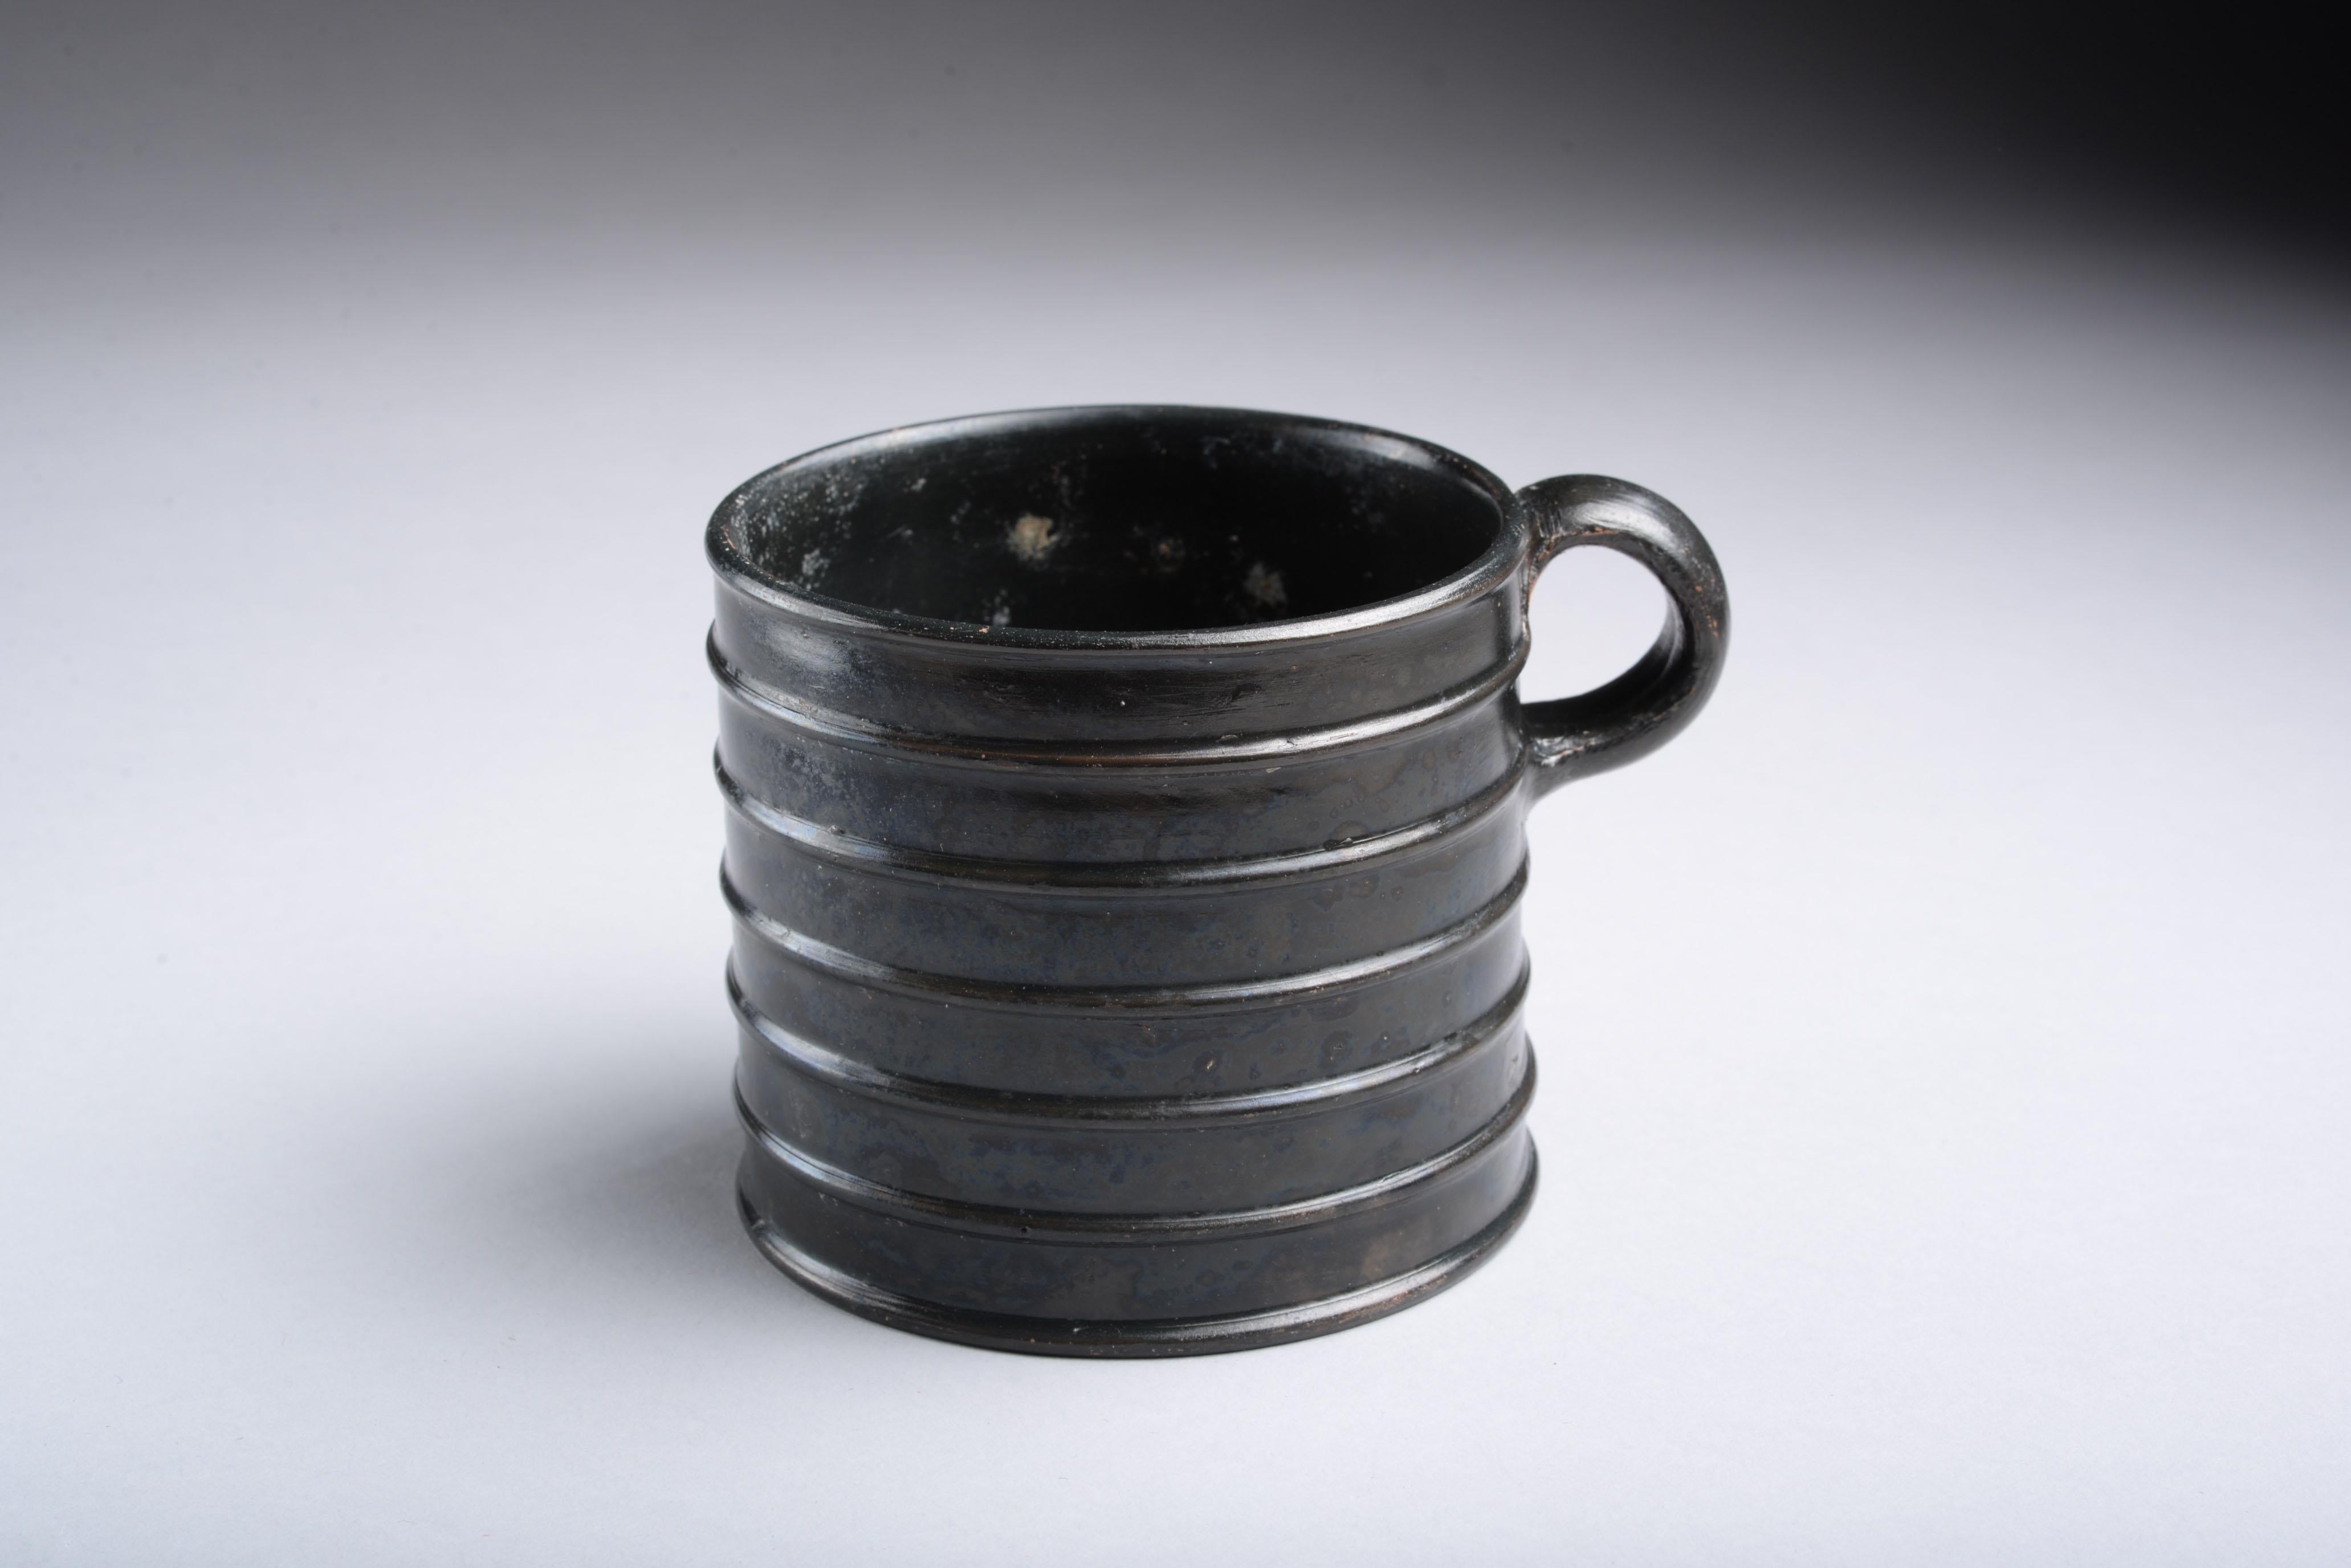 Greek black-glaze ribbed mug
Athens, circa 475-425 B.C.
terracotta.

The mug is of a straight-sided, cylindrical form with seven horizontal ribs and an applied ring handle just below the lip. The base is flat with a slightly raised foot running